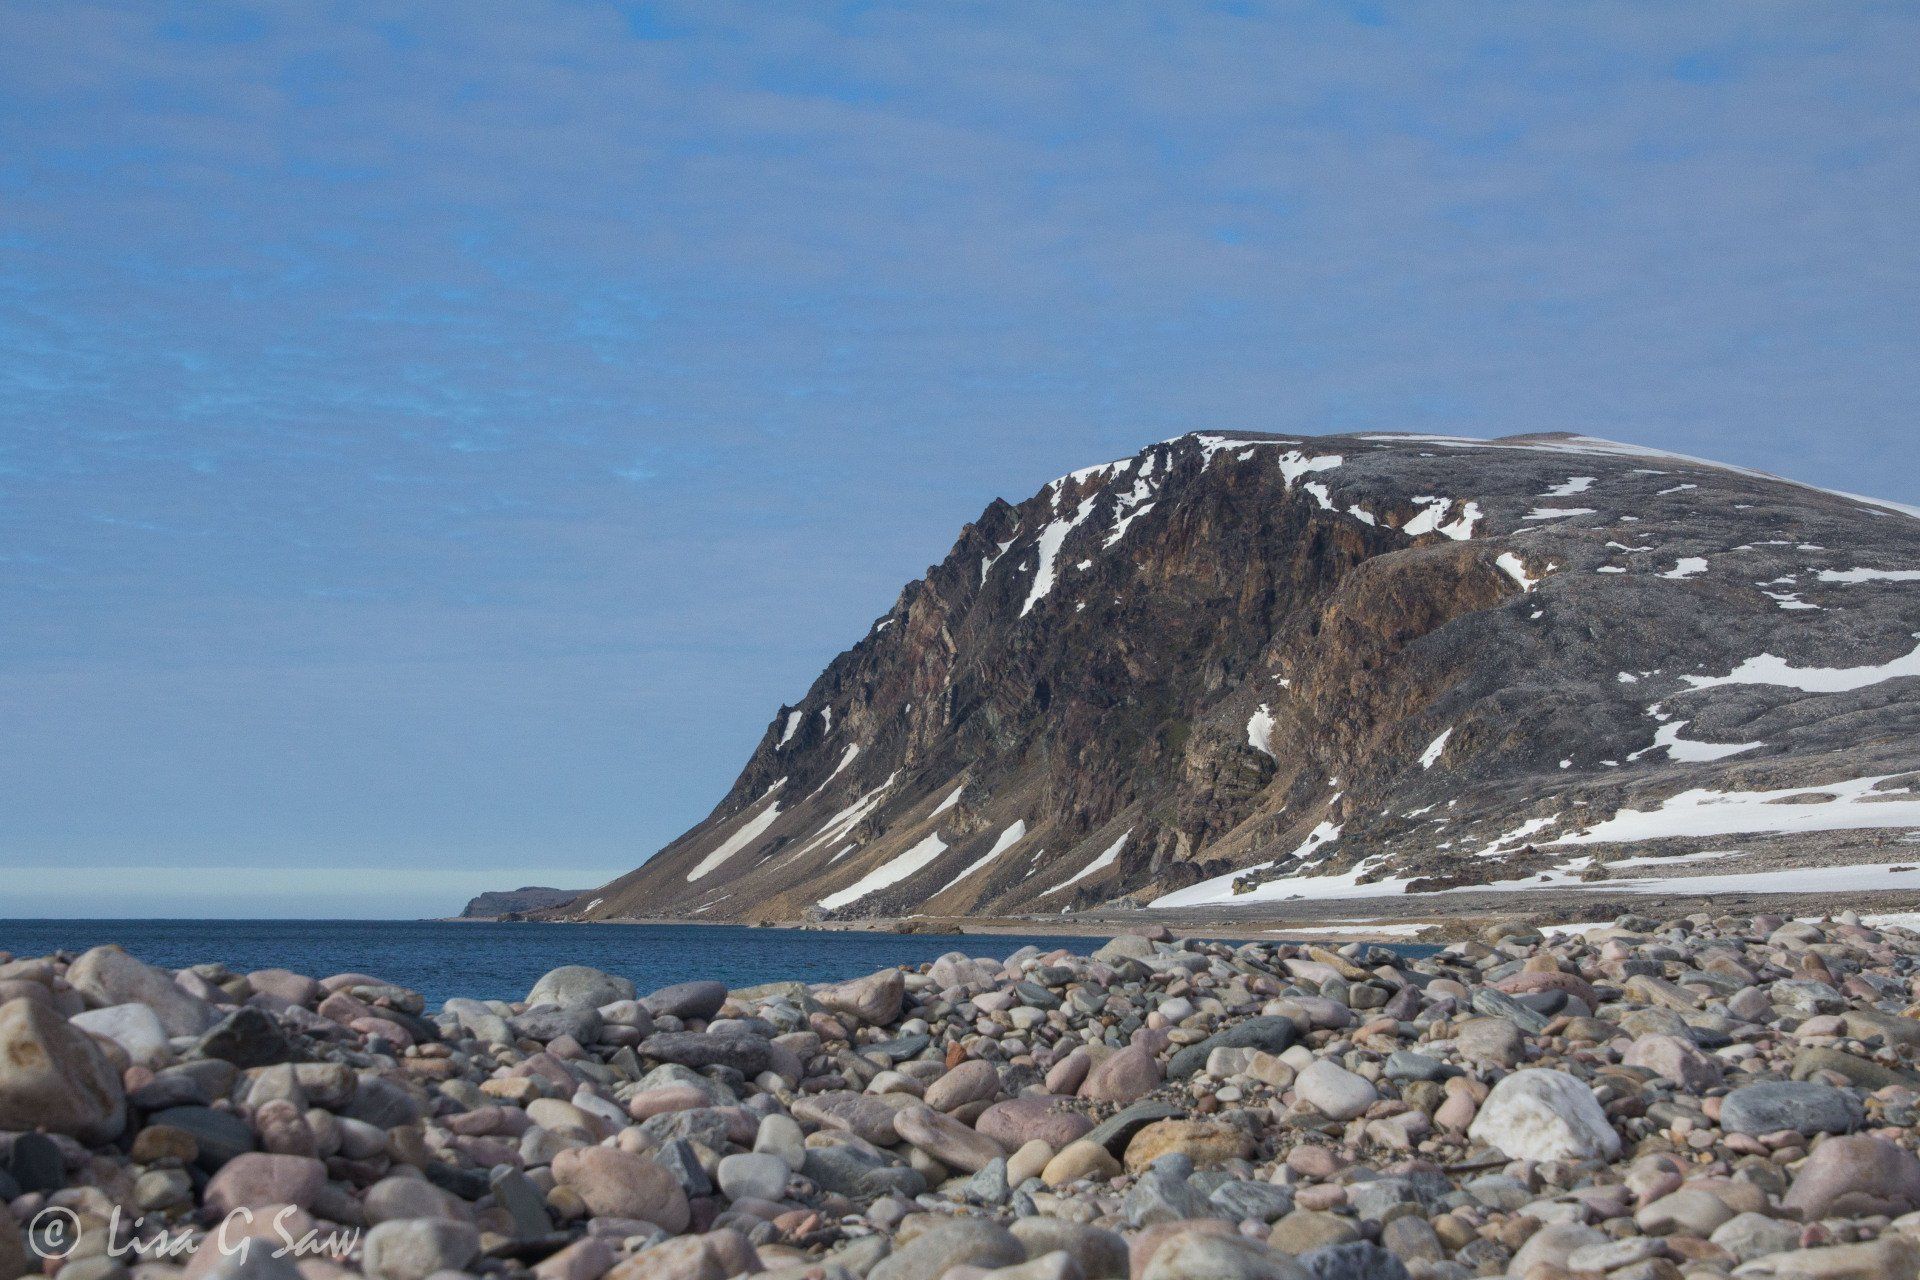 Beach and mountain on remote Arctic island